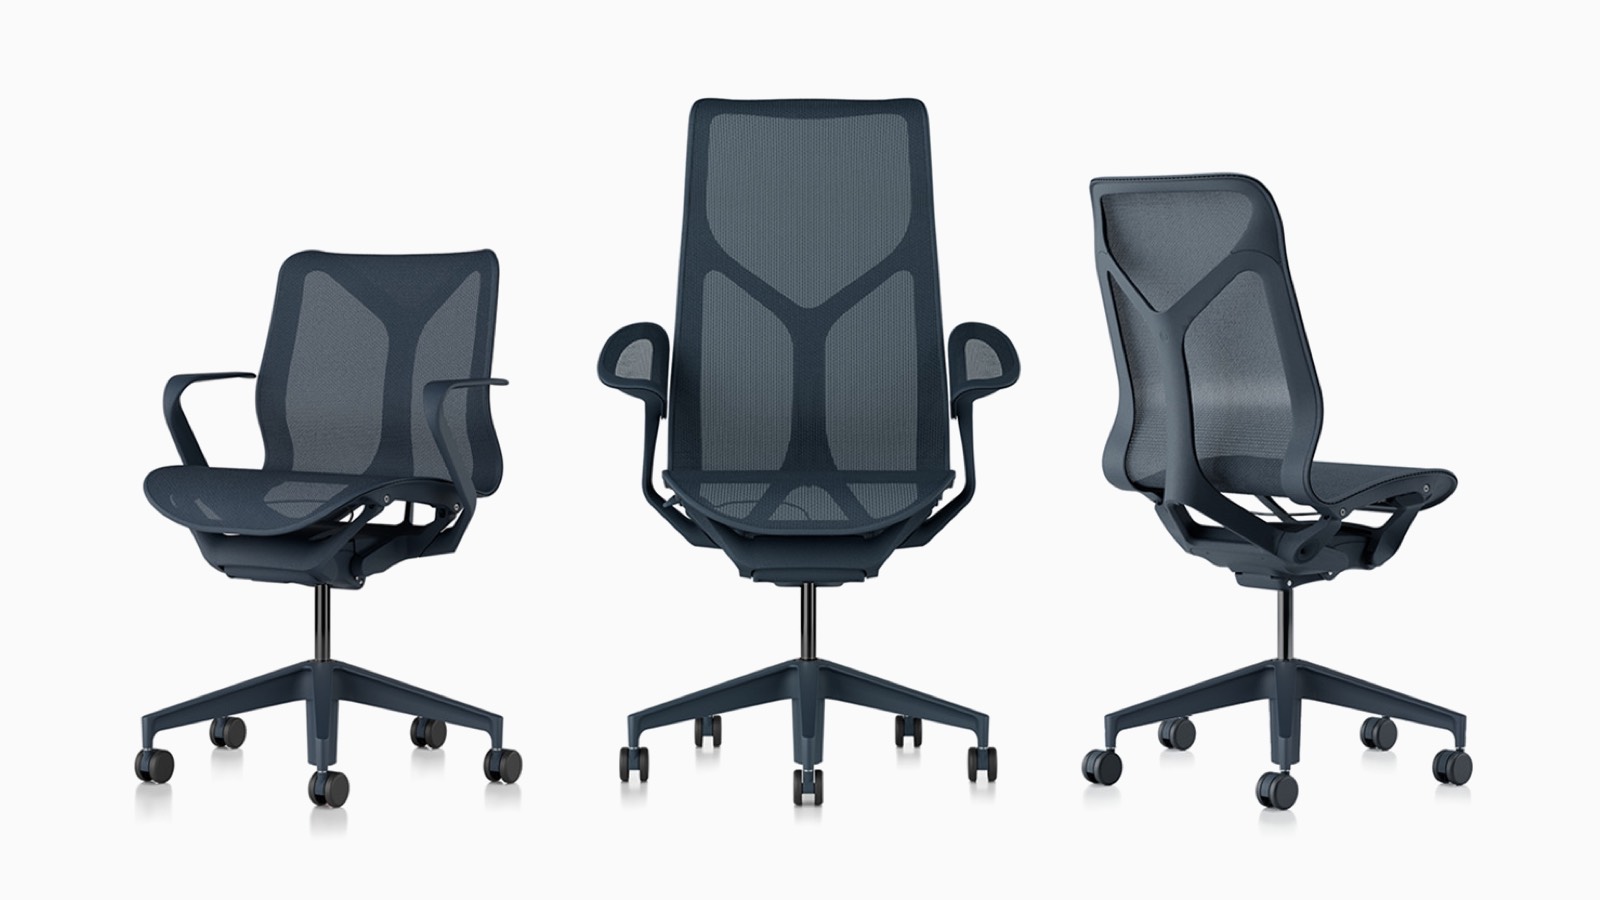 Low-back, high-back, and mid-back Cosm ergonomic desk chairs with suspension materials, bases, and frames in Nightfall navy blue.